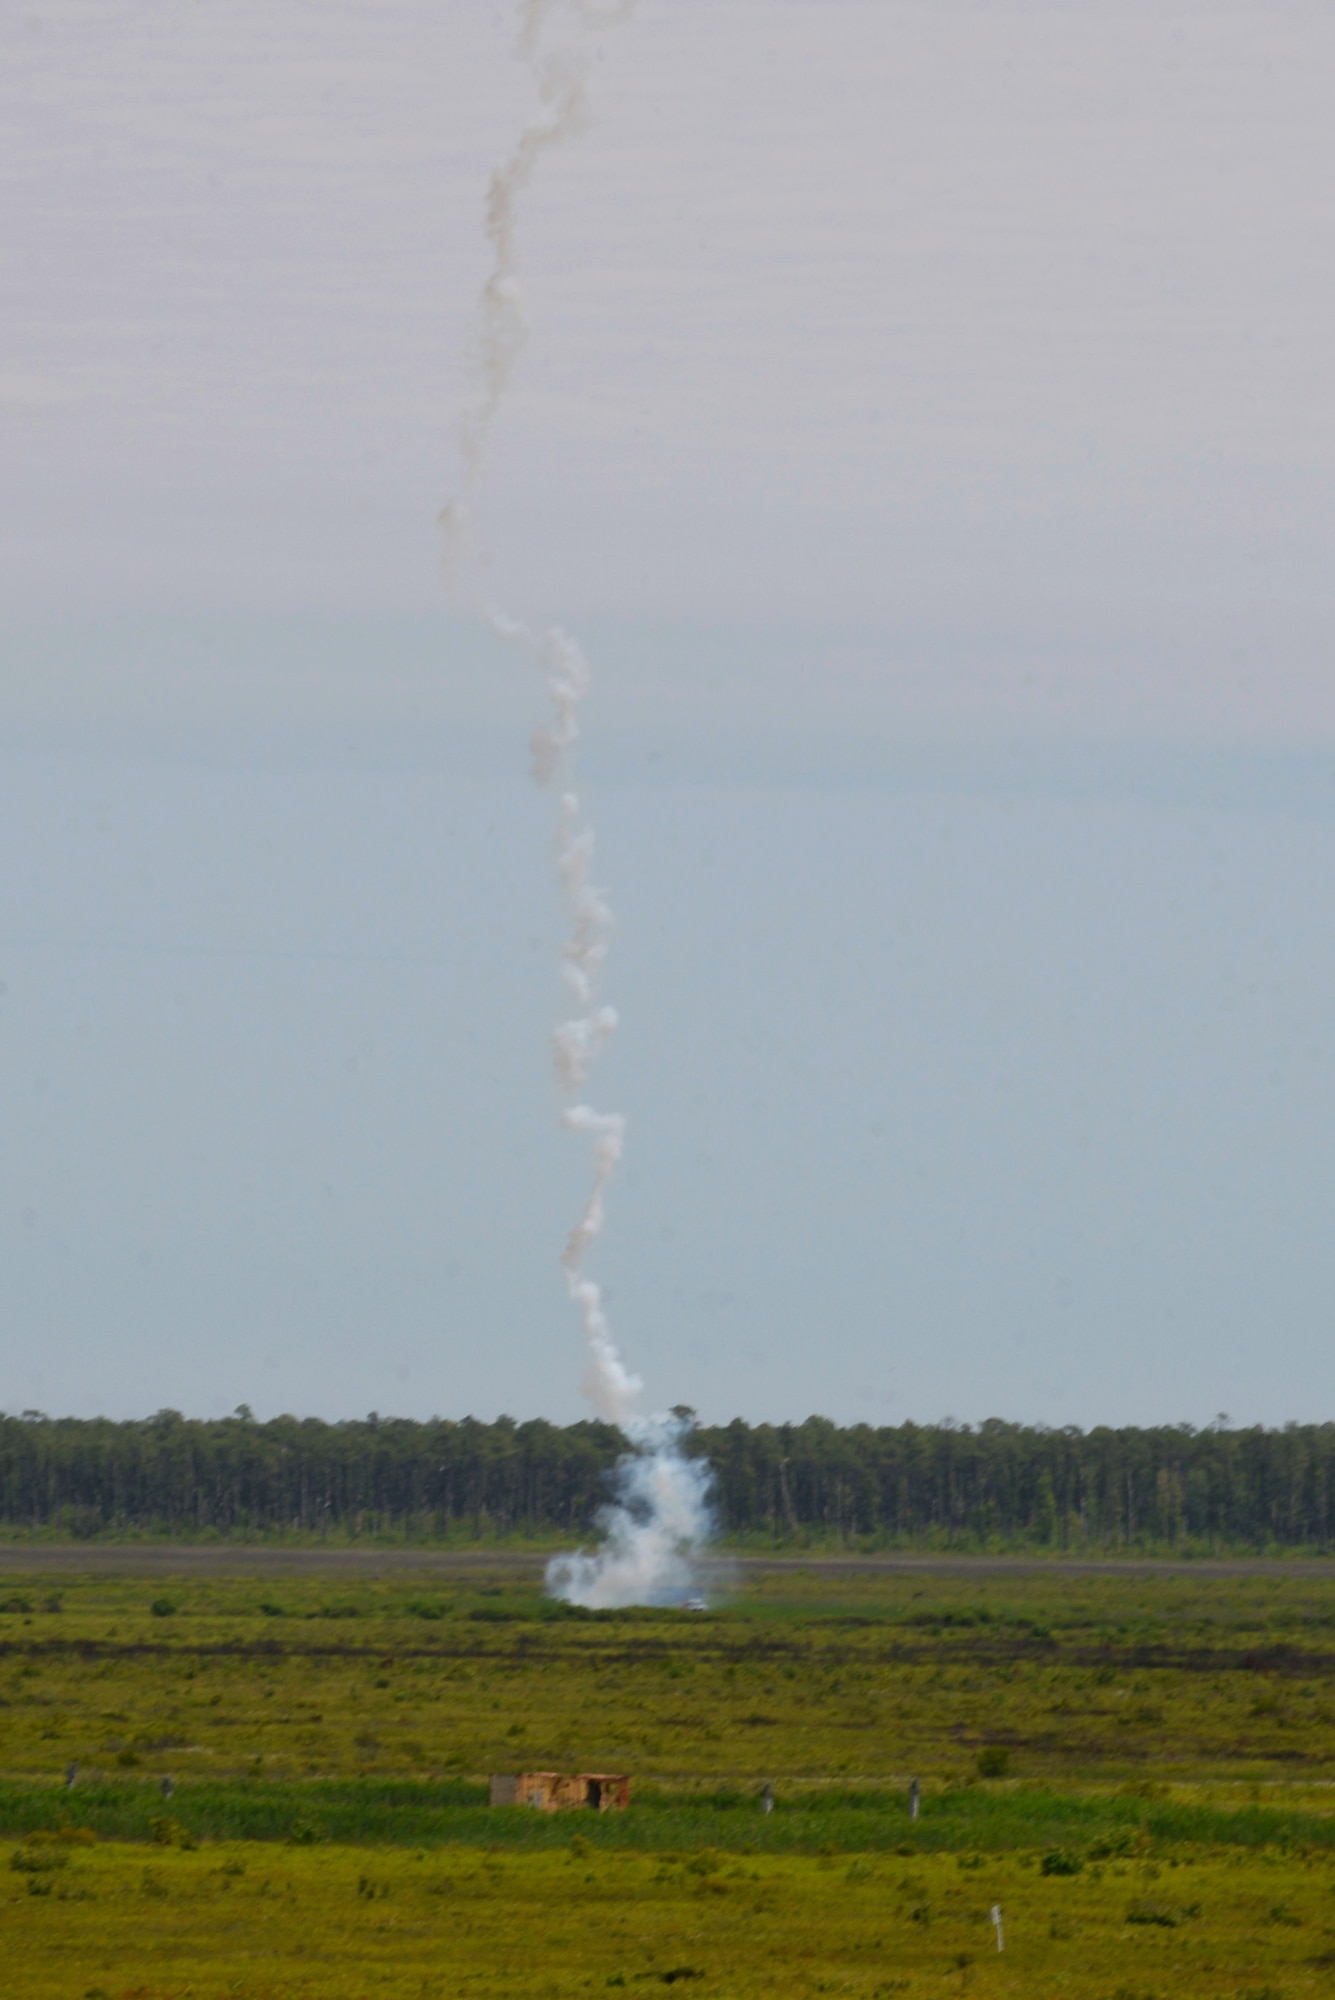 Exercise organizers fire a simulated surface-to-air missile at an incoming aircraft during Razor Talon, May 20, 2016, at Dare County Bombing Range, North Carolina. Joint terminal attack controllers, joint fires observers and air support operations center personnel, assigned to the 25th Air Support Operations Squadron and 25th Infantry Division, Schofield Barracks, Hawaii, participated in the exercise for the first time. (U.S. Air Force photo by Airman 1st Class Ashley Williamson/Released)